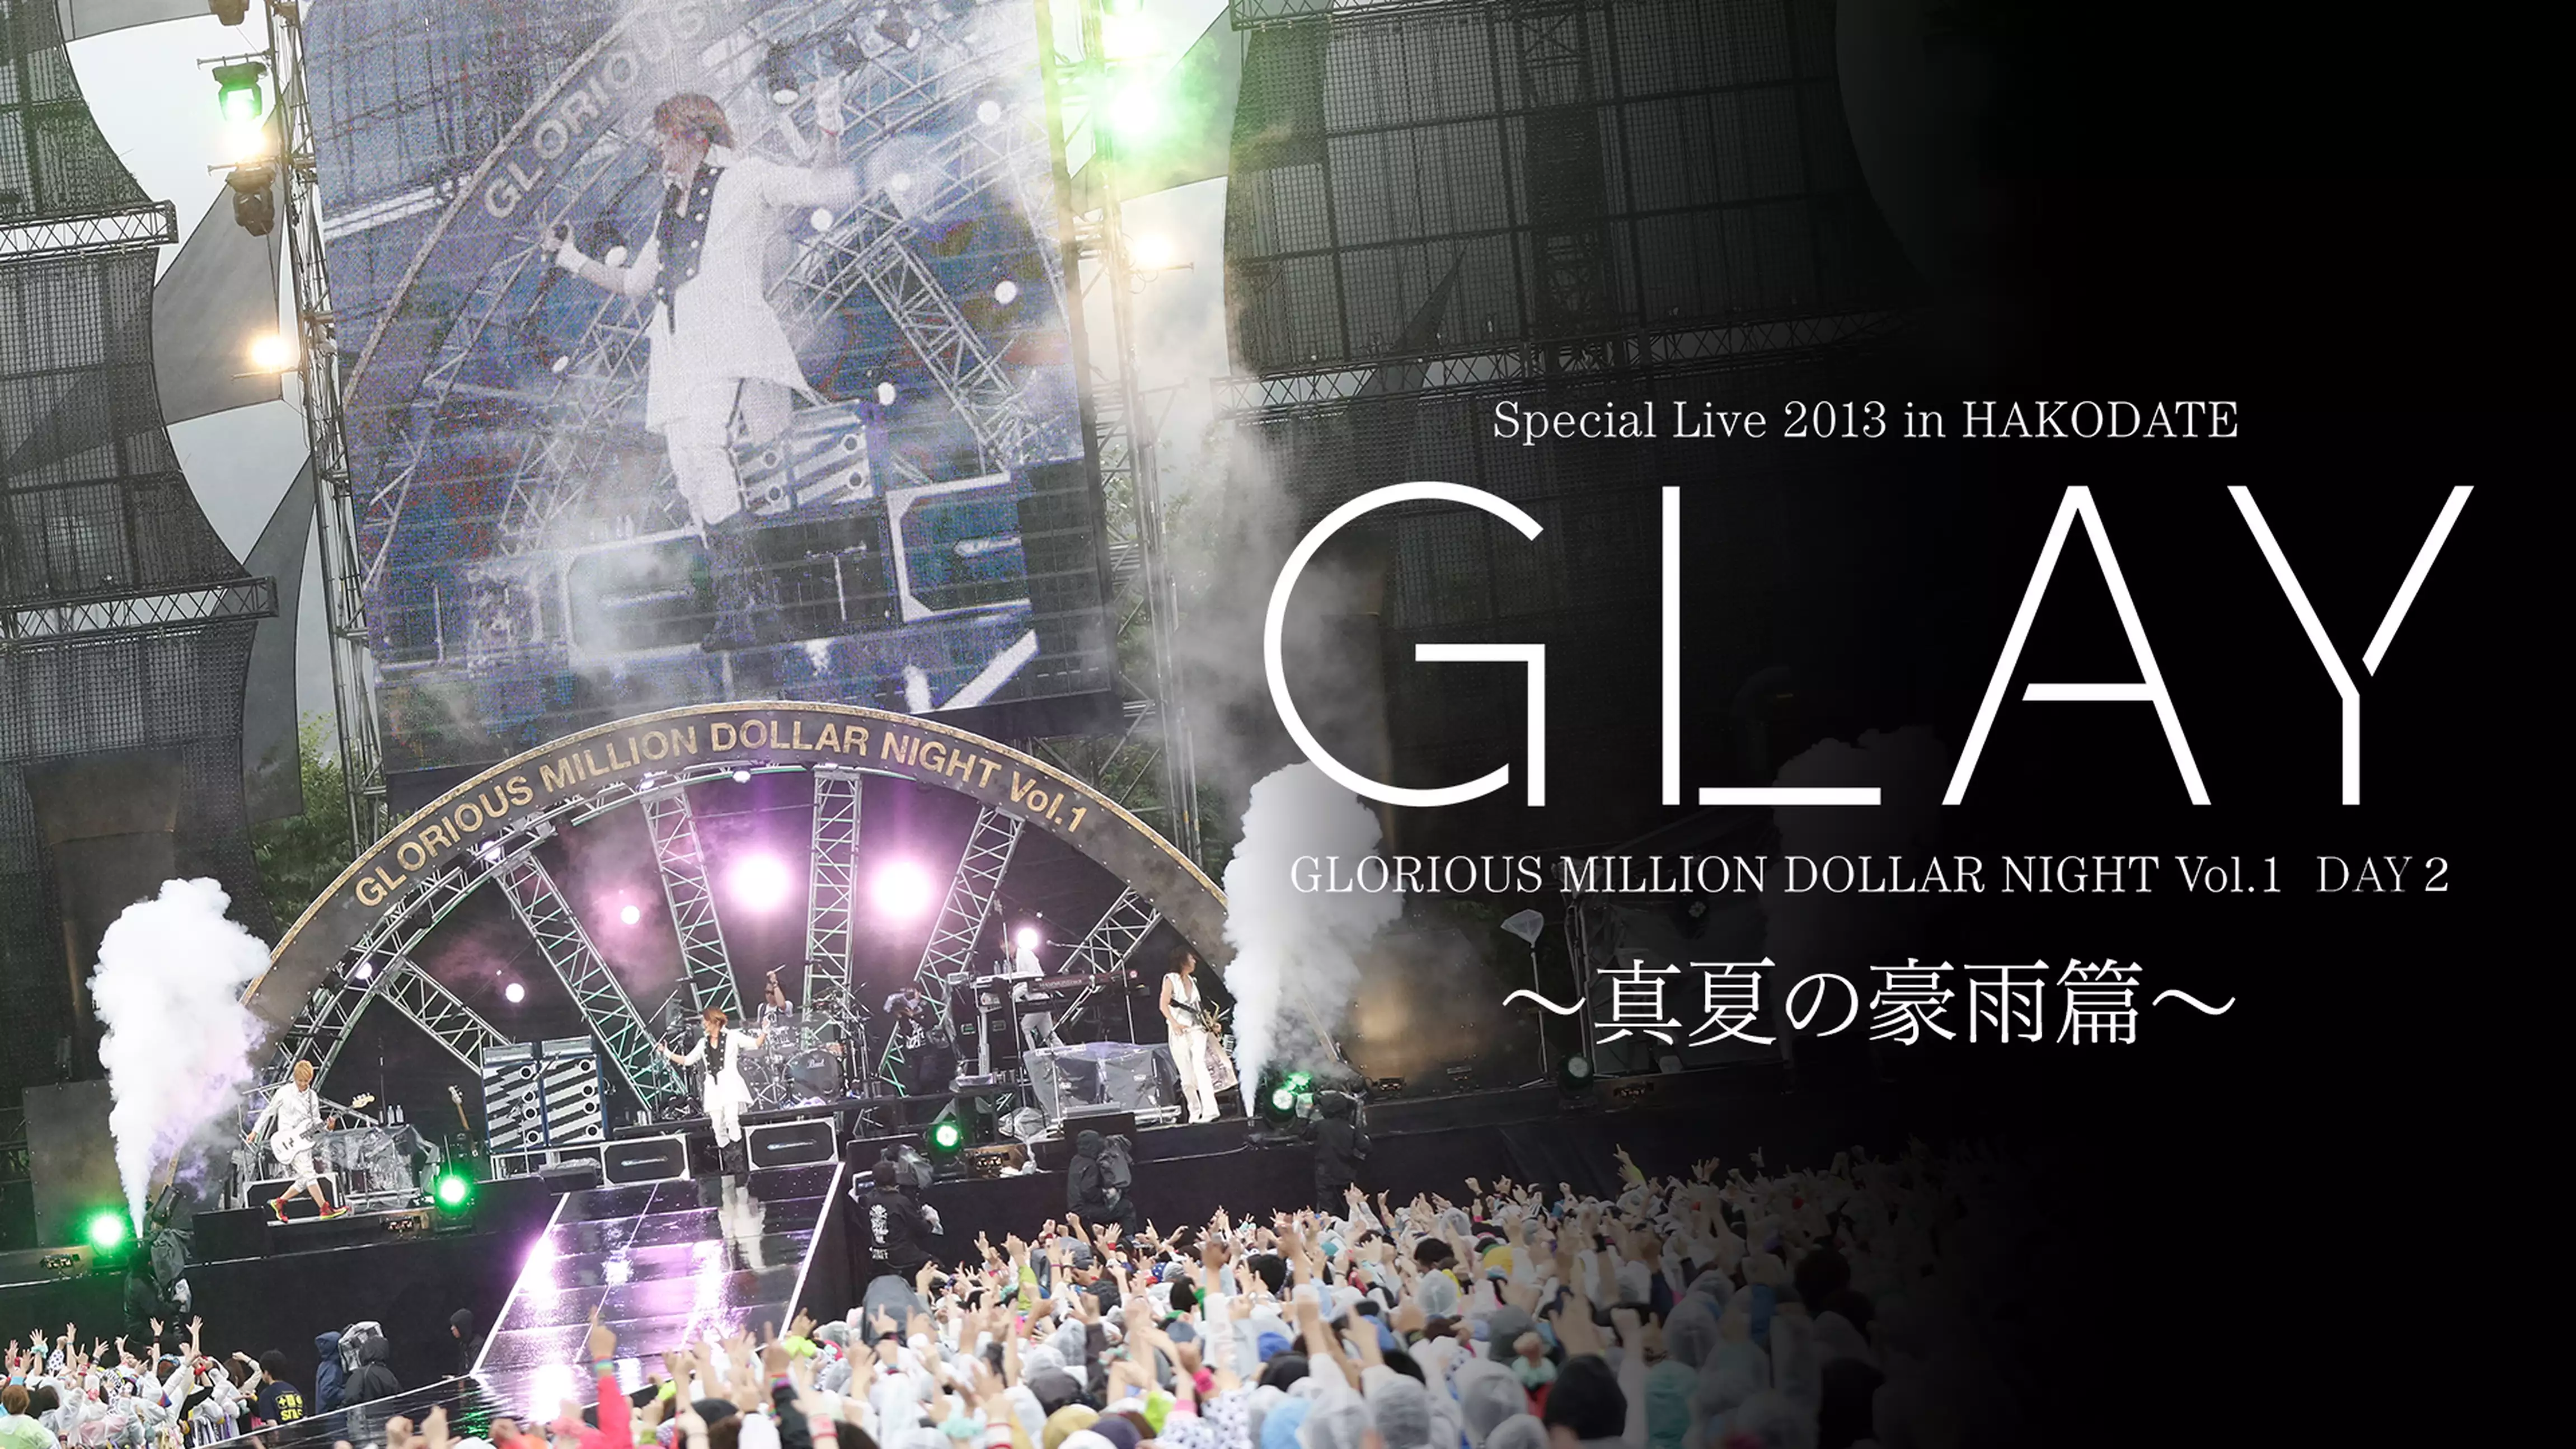 GLAY Special Live 2013 in HAKODATE GLORIOUS MILLION DOLLAR